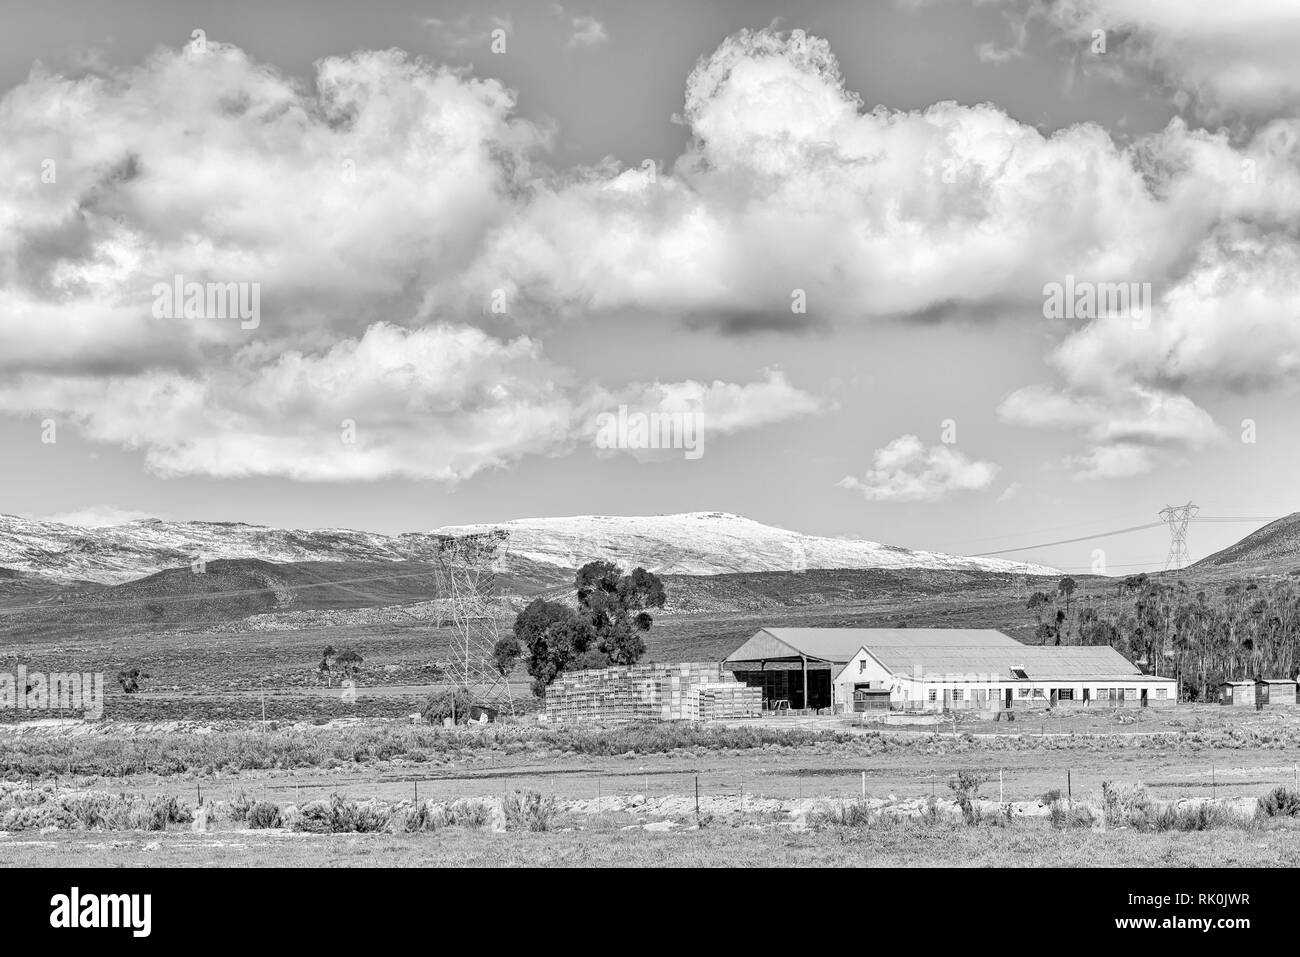 CERES, SOUTH AFRICA, AUGUST 8, 2018: Monochrome farm landscape on road R46 near Ceres in the Western Cape Province. Barns, fruit crates, electricity i Stock Photo